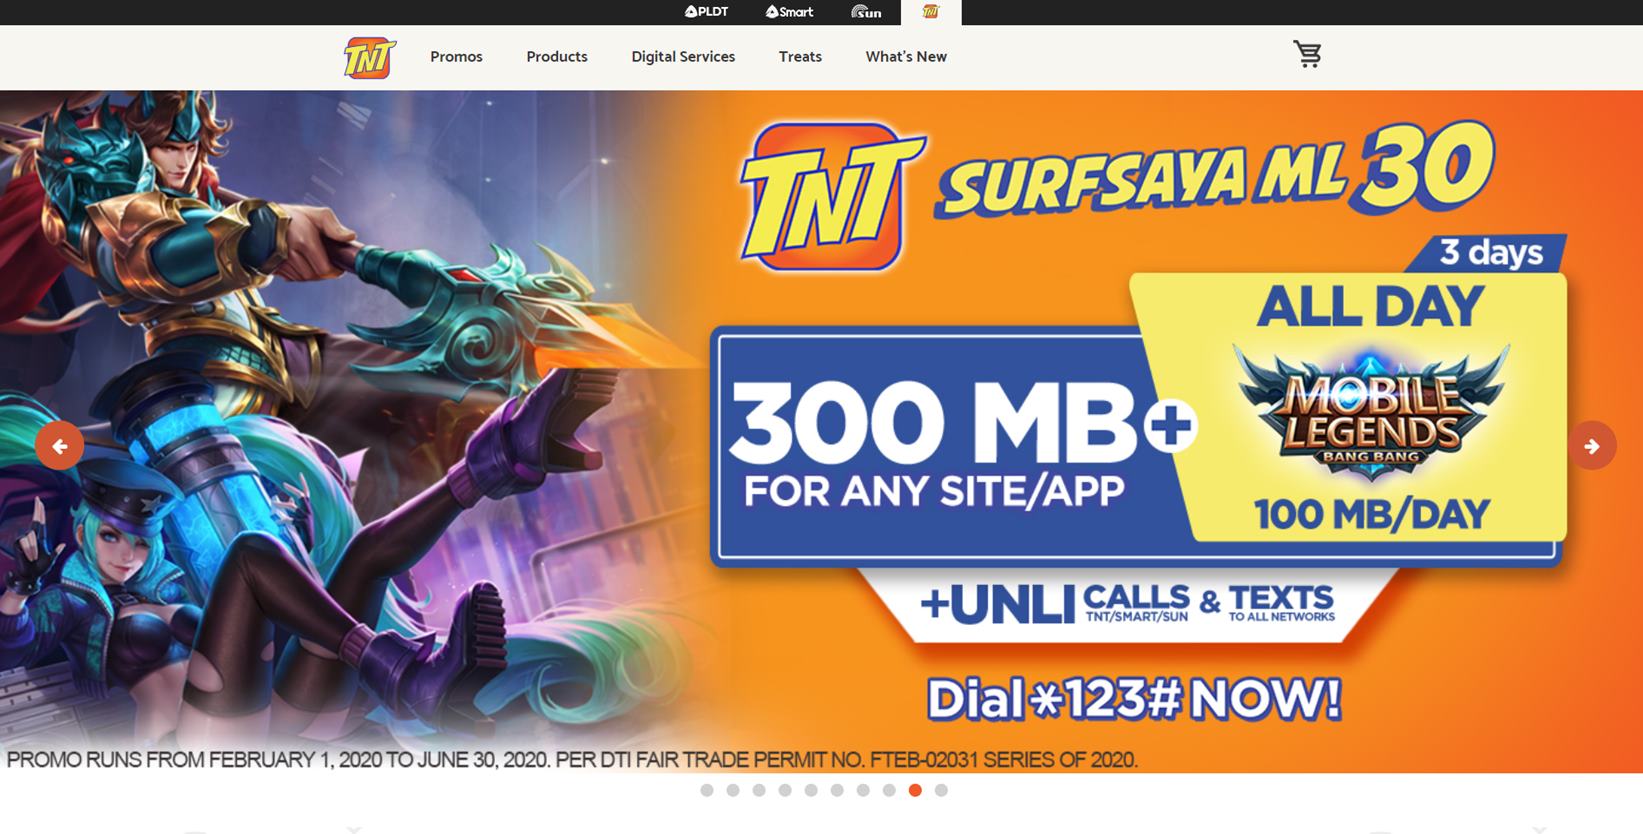 List Of Tnt Mobile Promos For Call Text And Surf Cebu 24 7